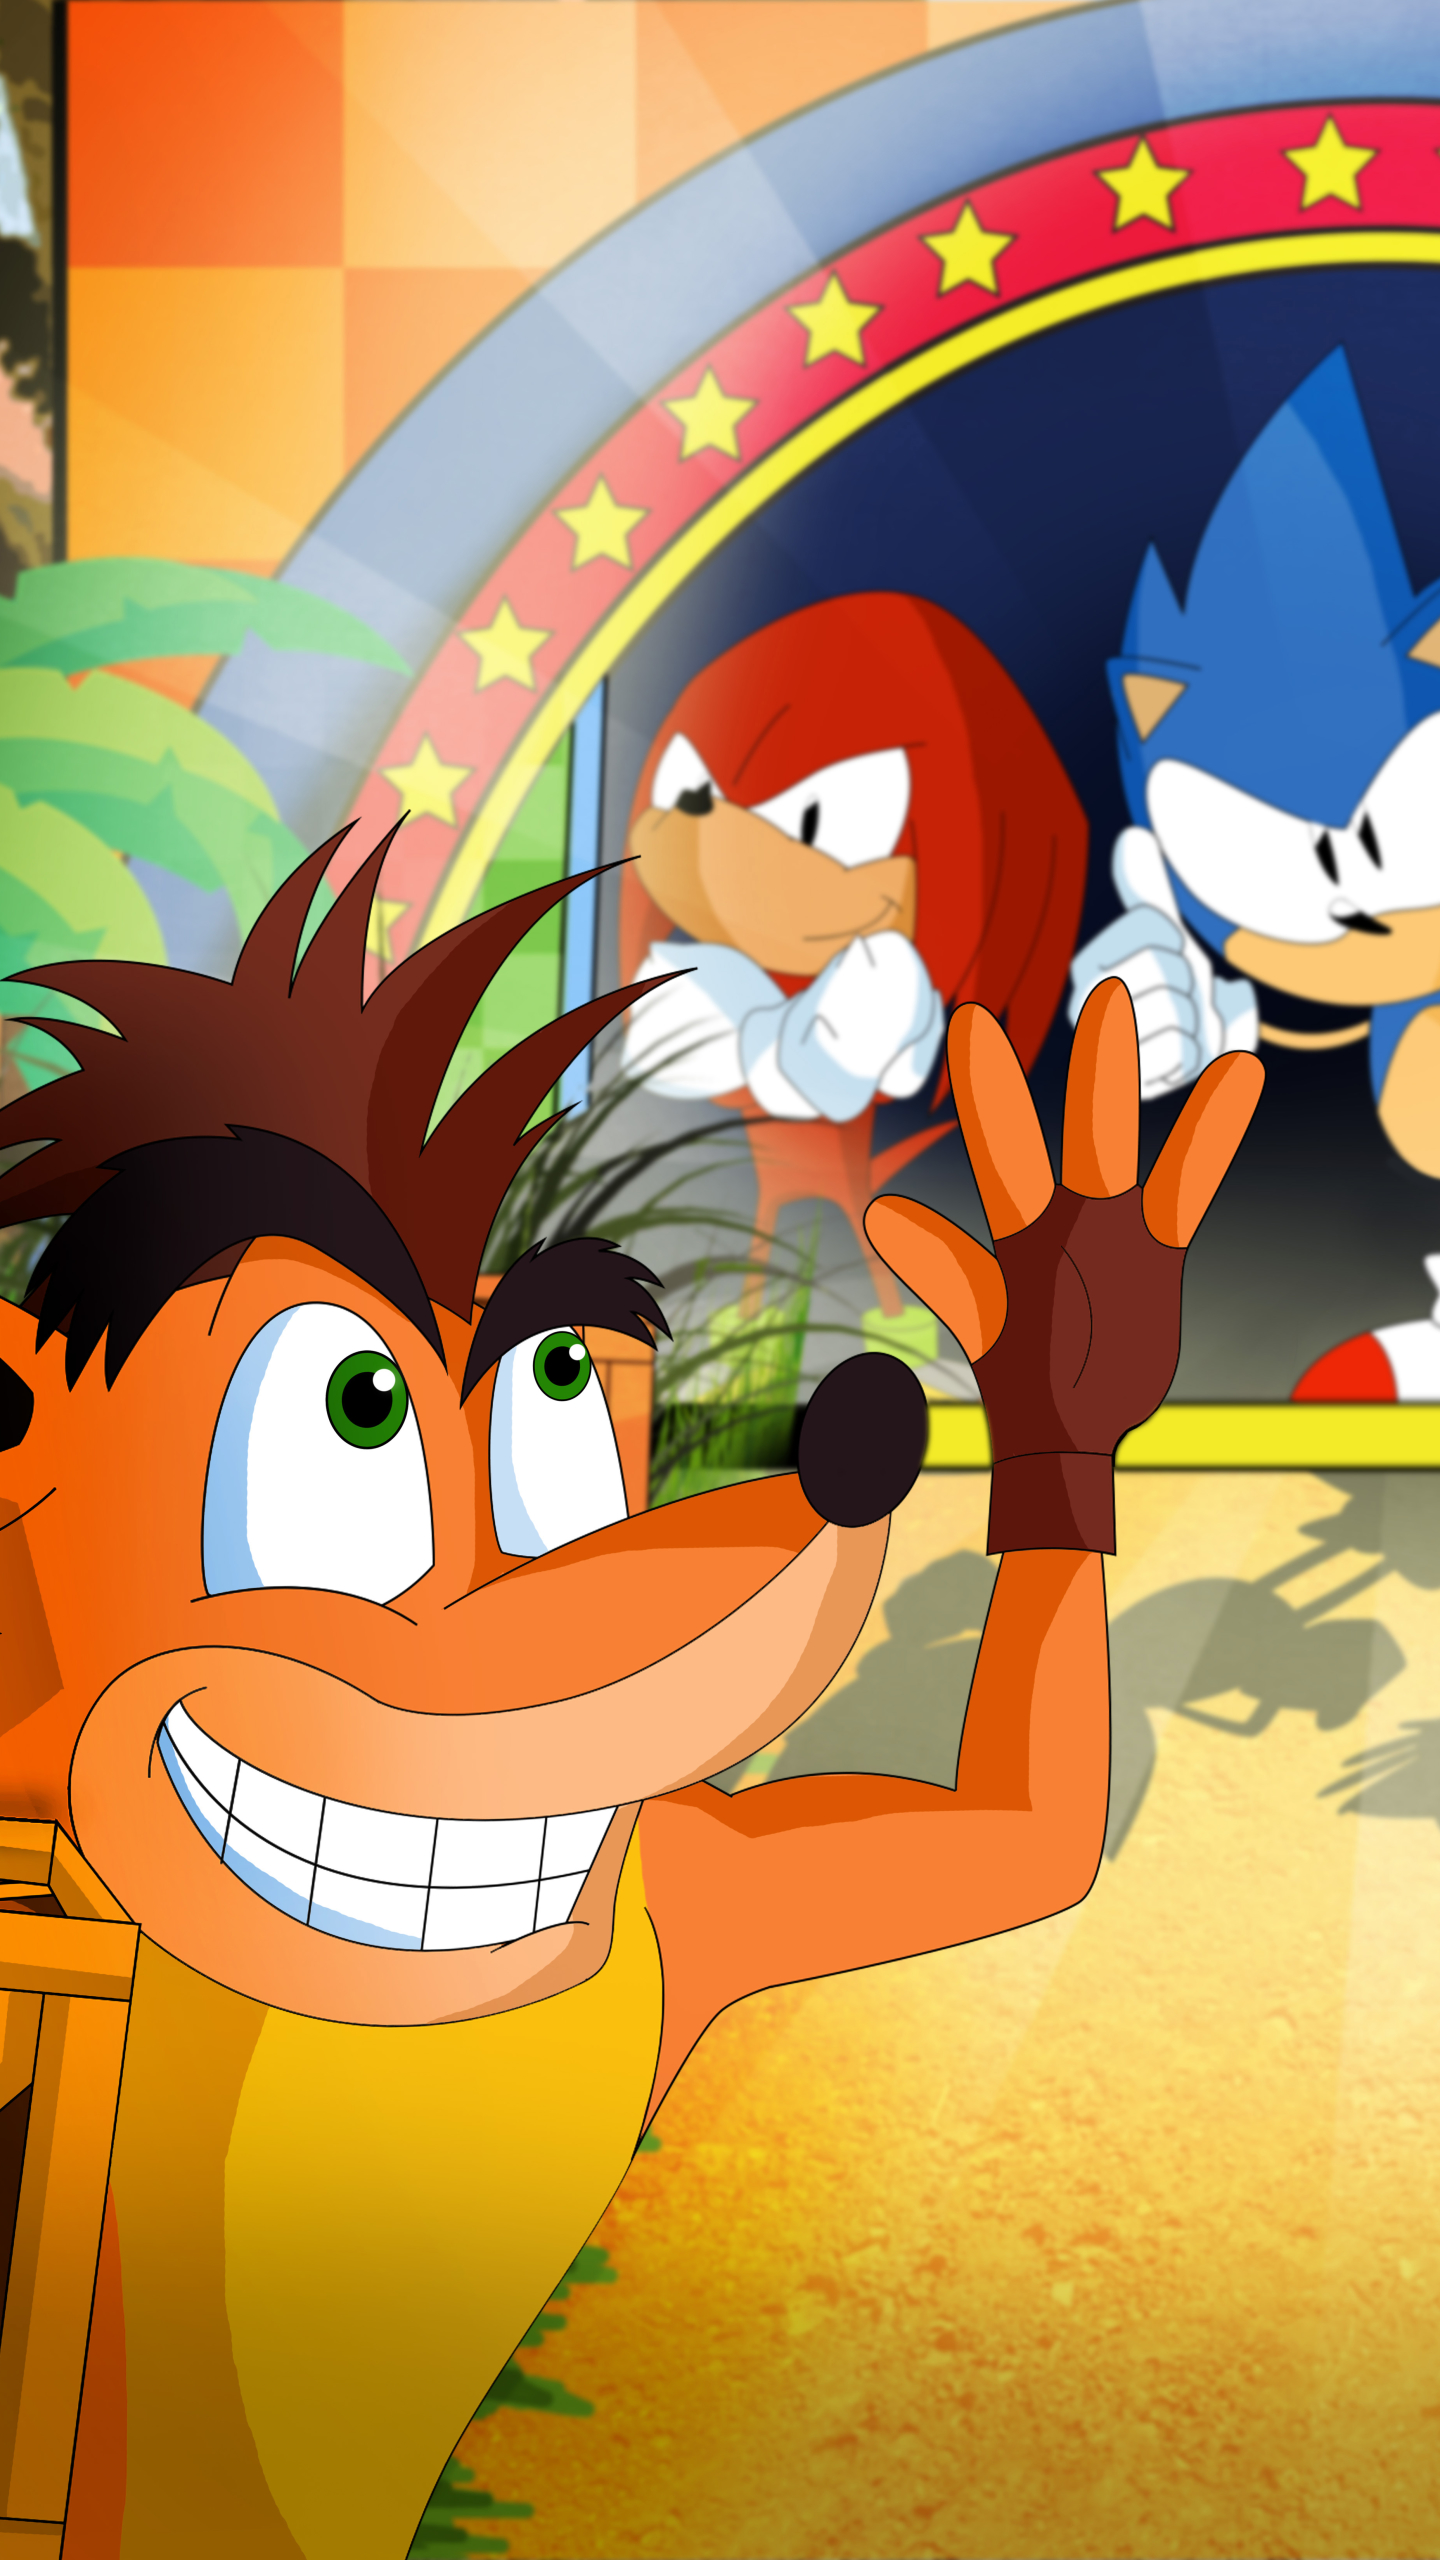 video game, crossover, classic sonic, classic knuckles, sonic the hedgehog, knuckles the echidna, coco bandicoot, crash bandicoot n sane trilogy, sonic mania, crash bandicoot Full HD